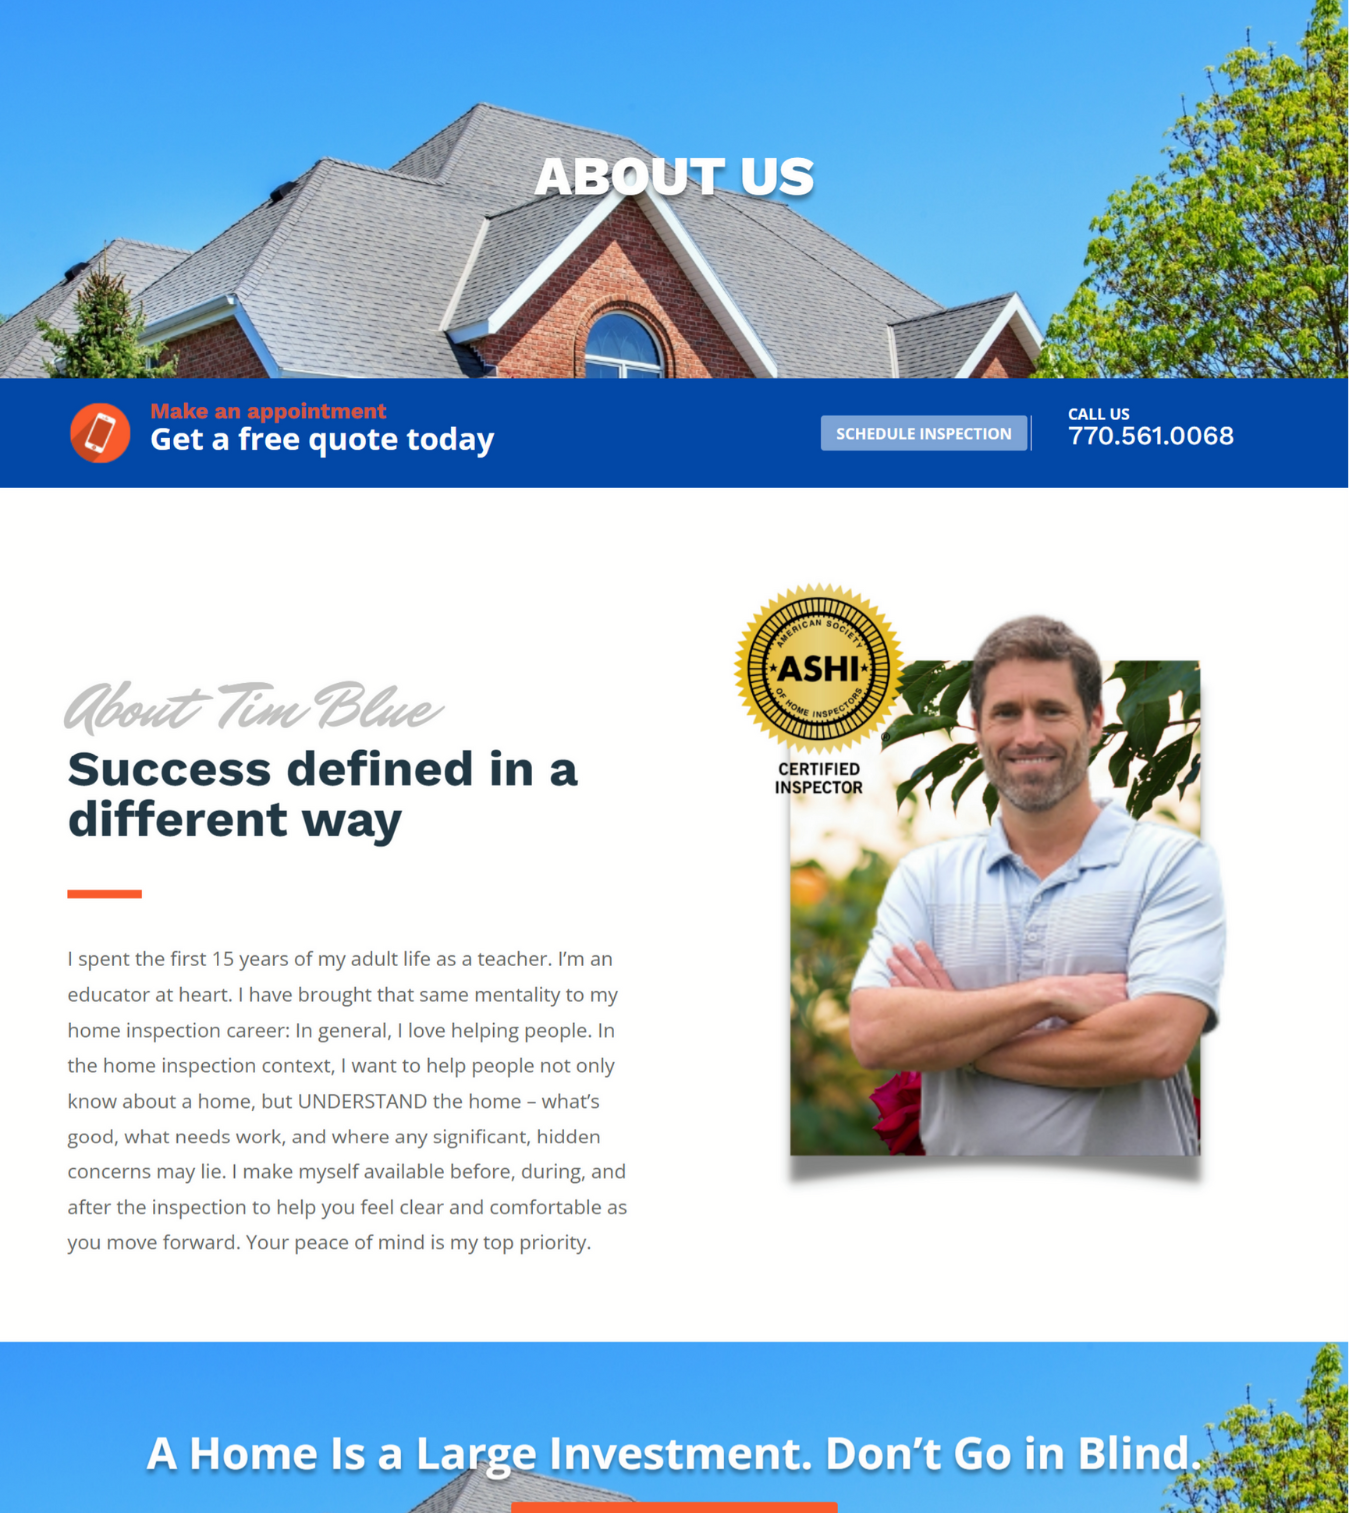 Home Inspection website design about us page image